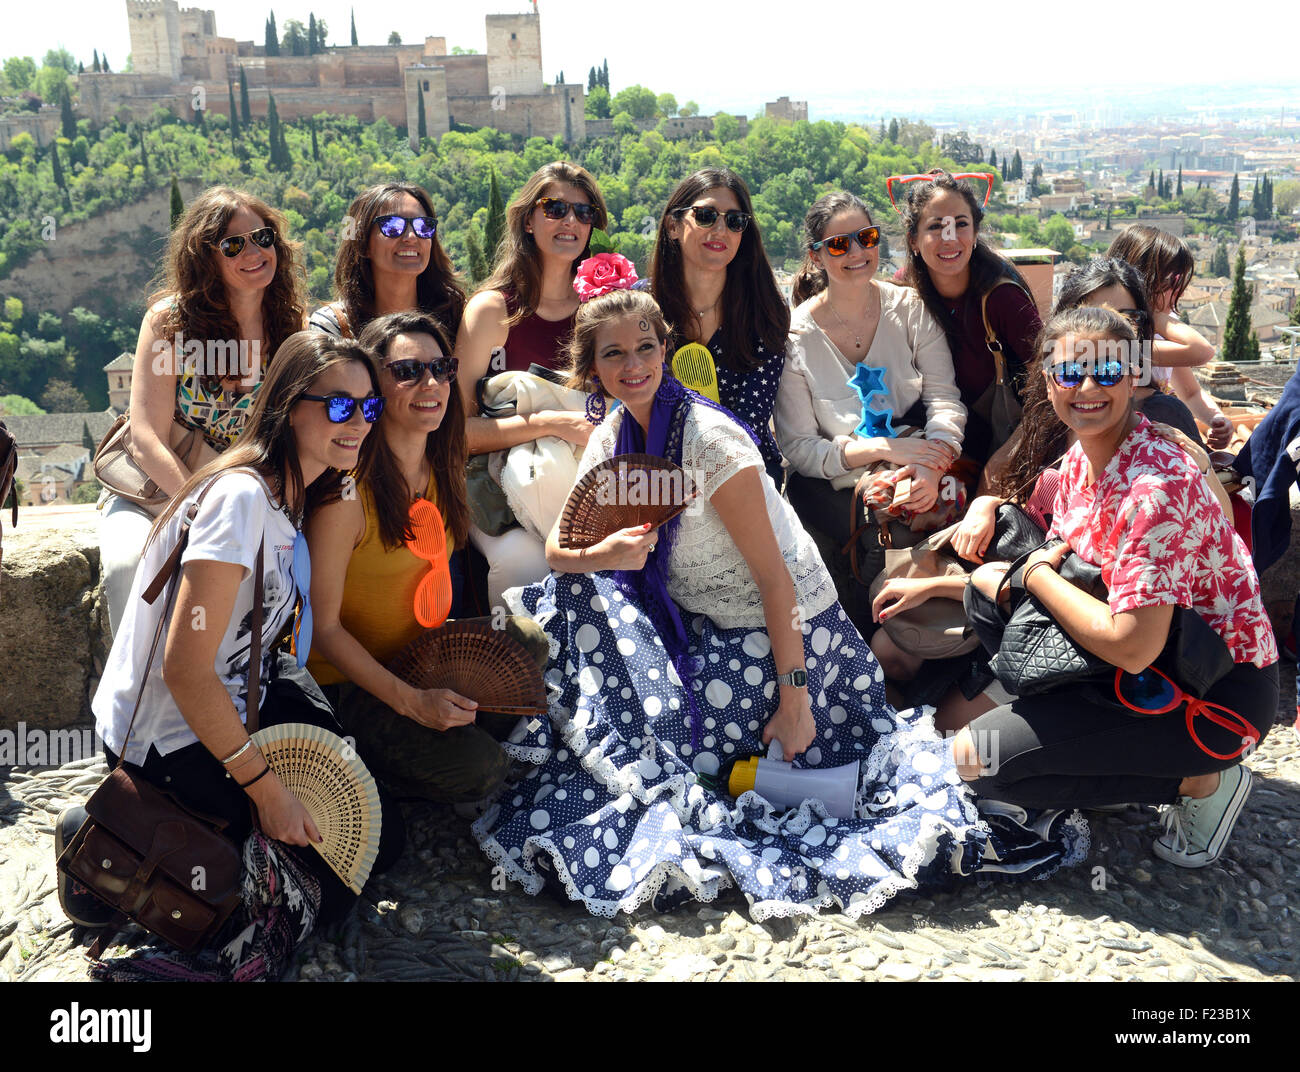 Donne girls party weekend divertente Granada Spagna spagnolo partying femminile europeo. Foto Stock